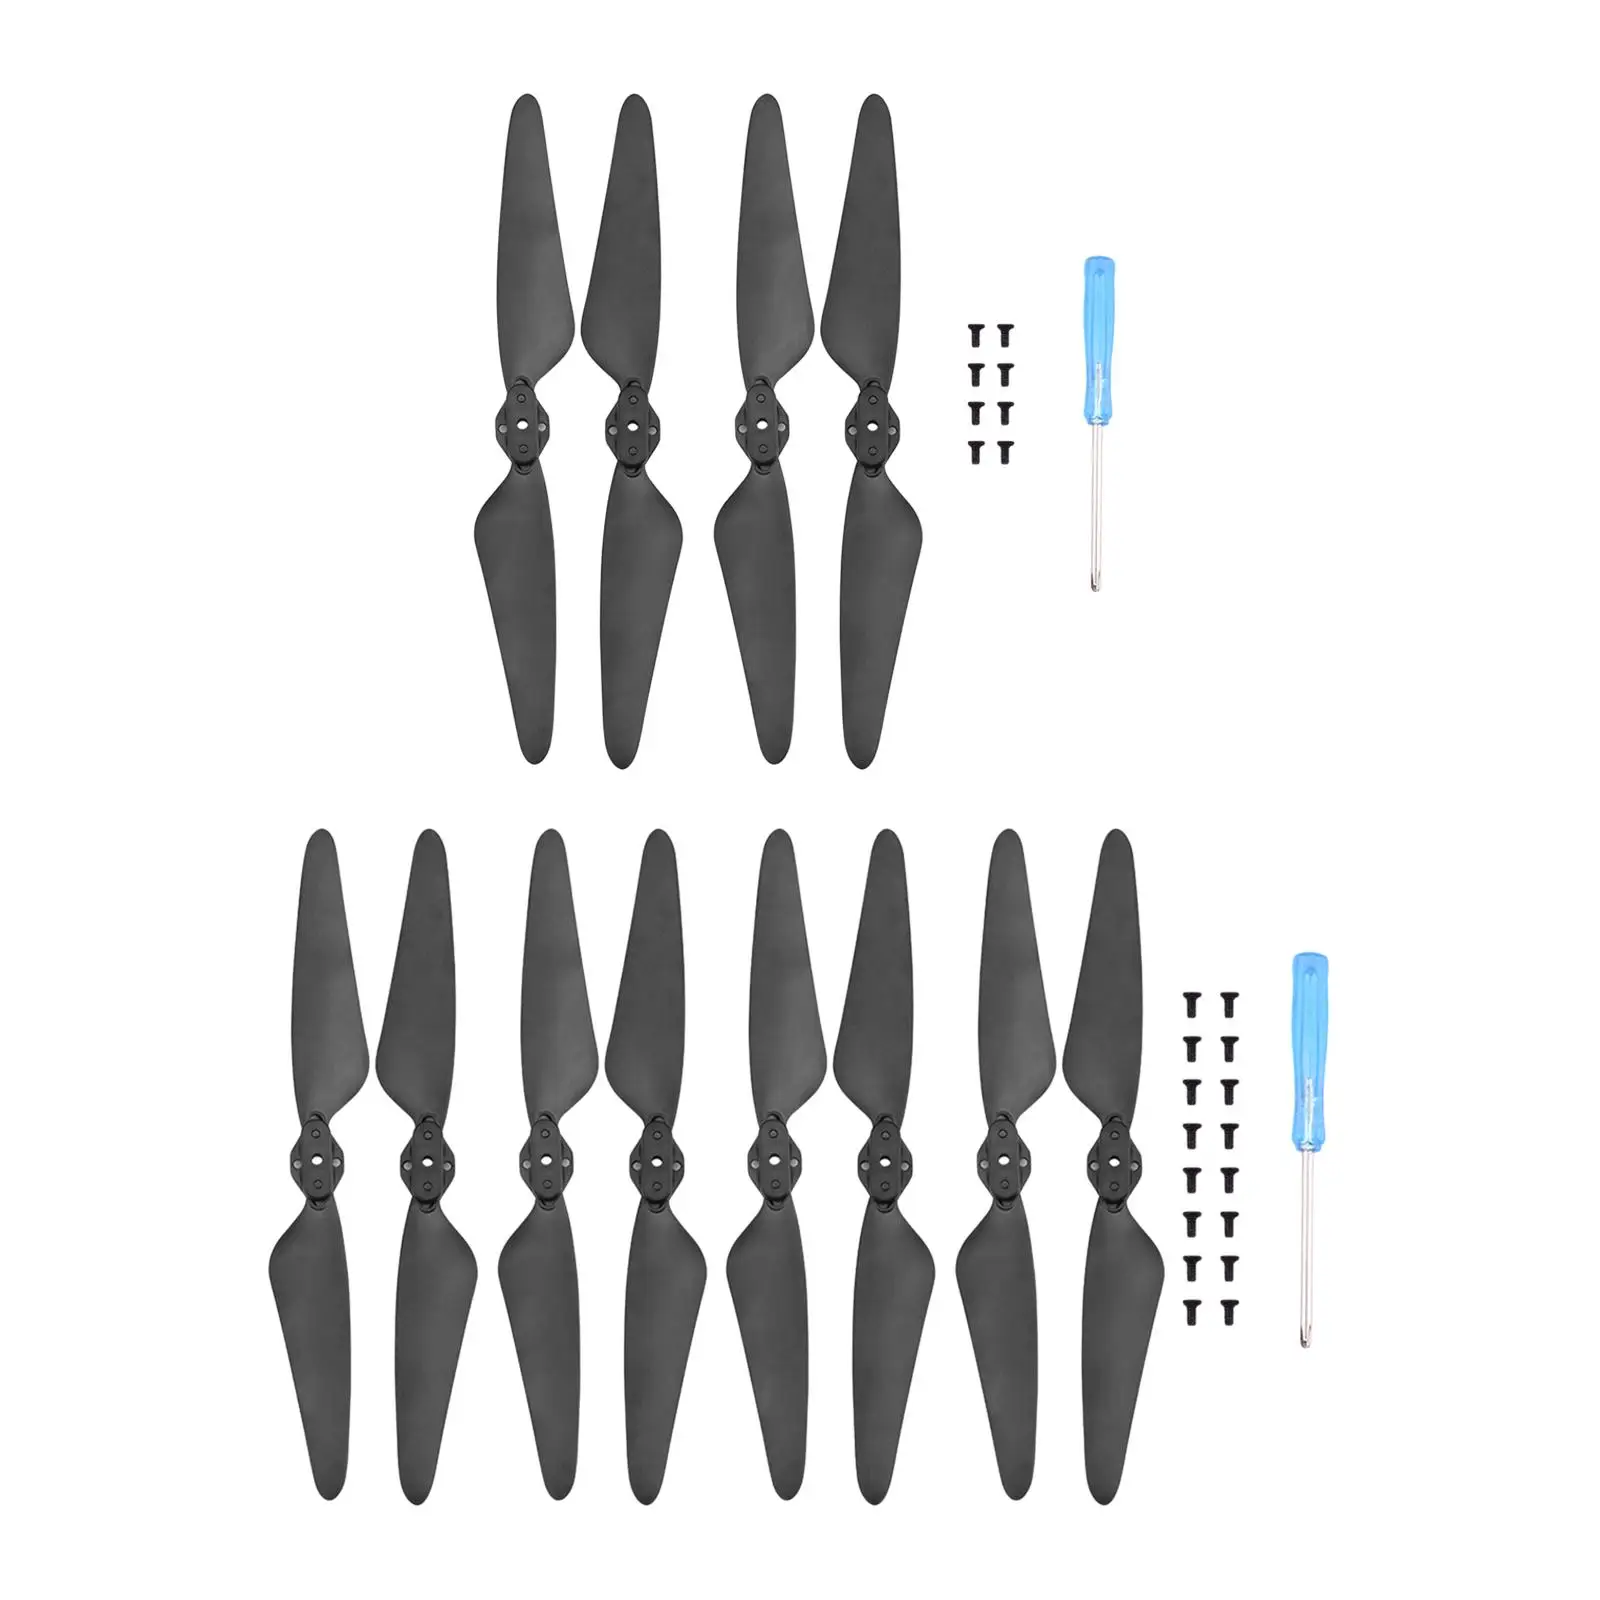 Replacement Propellers Paddle, Low Noise Well Balanced Lightweight Props for Beast3 SG906 Max RC drones